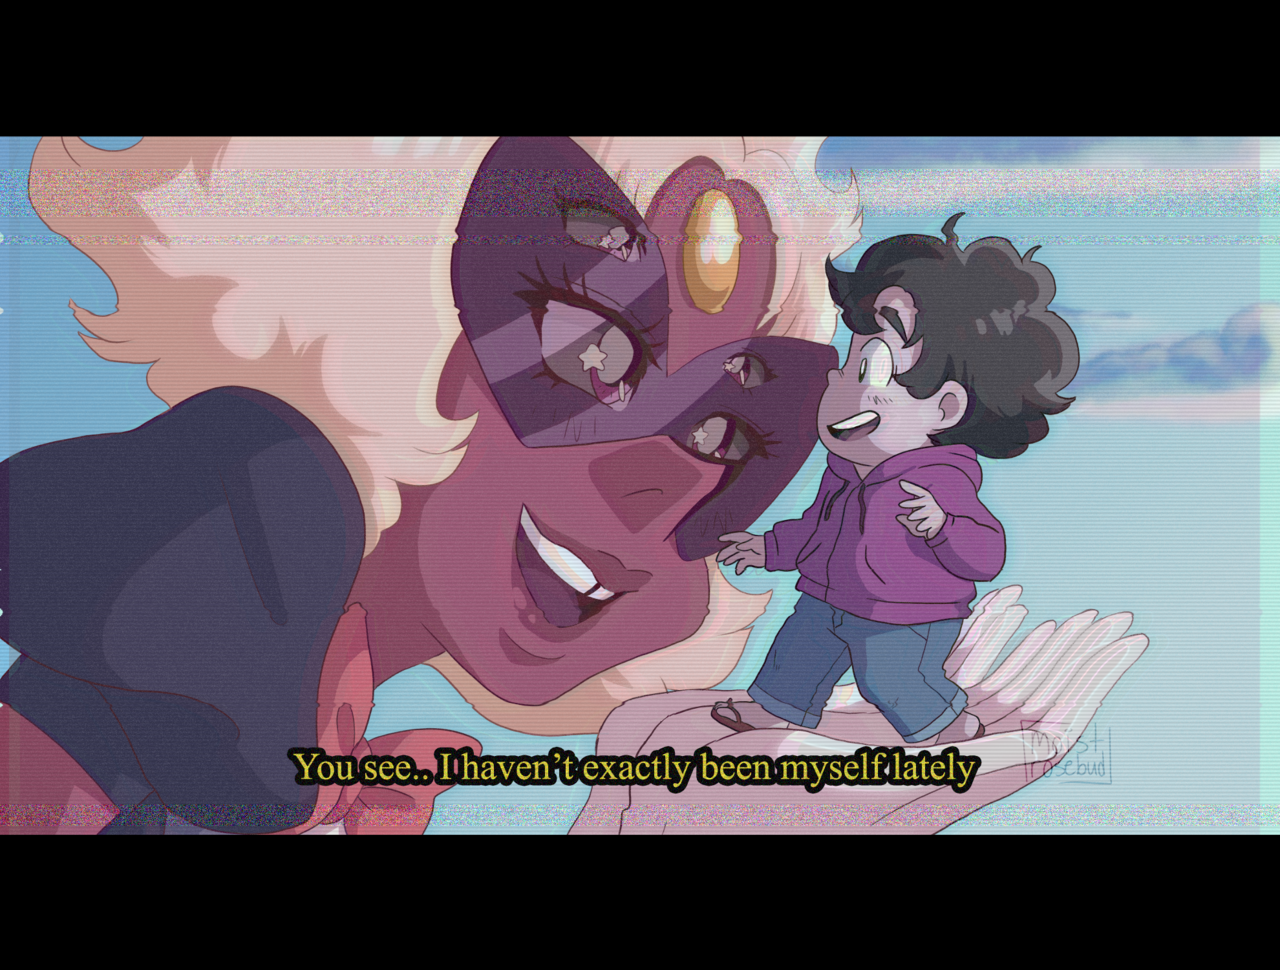 Yet another redraw from Steven Universe. This particular screenshot is from the episode “Cry for help”, in an old 90′s-ish inspired art style.